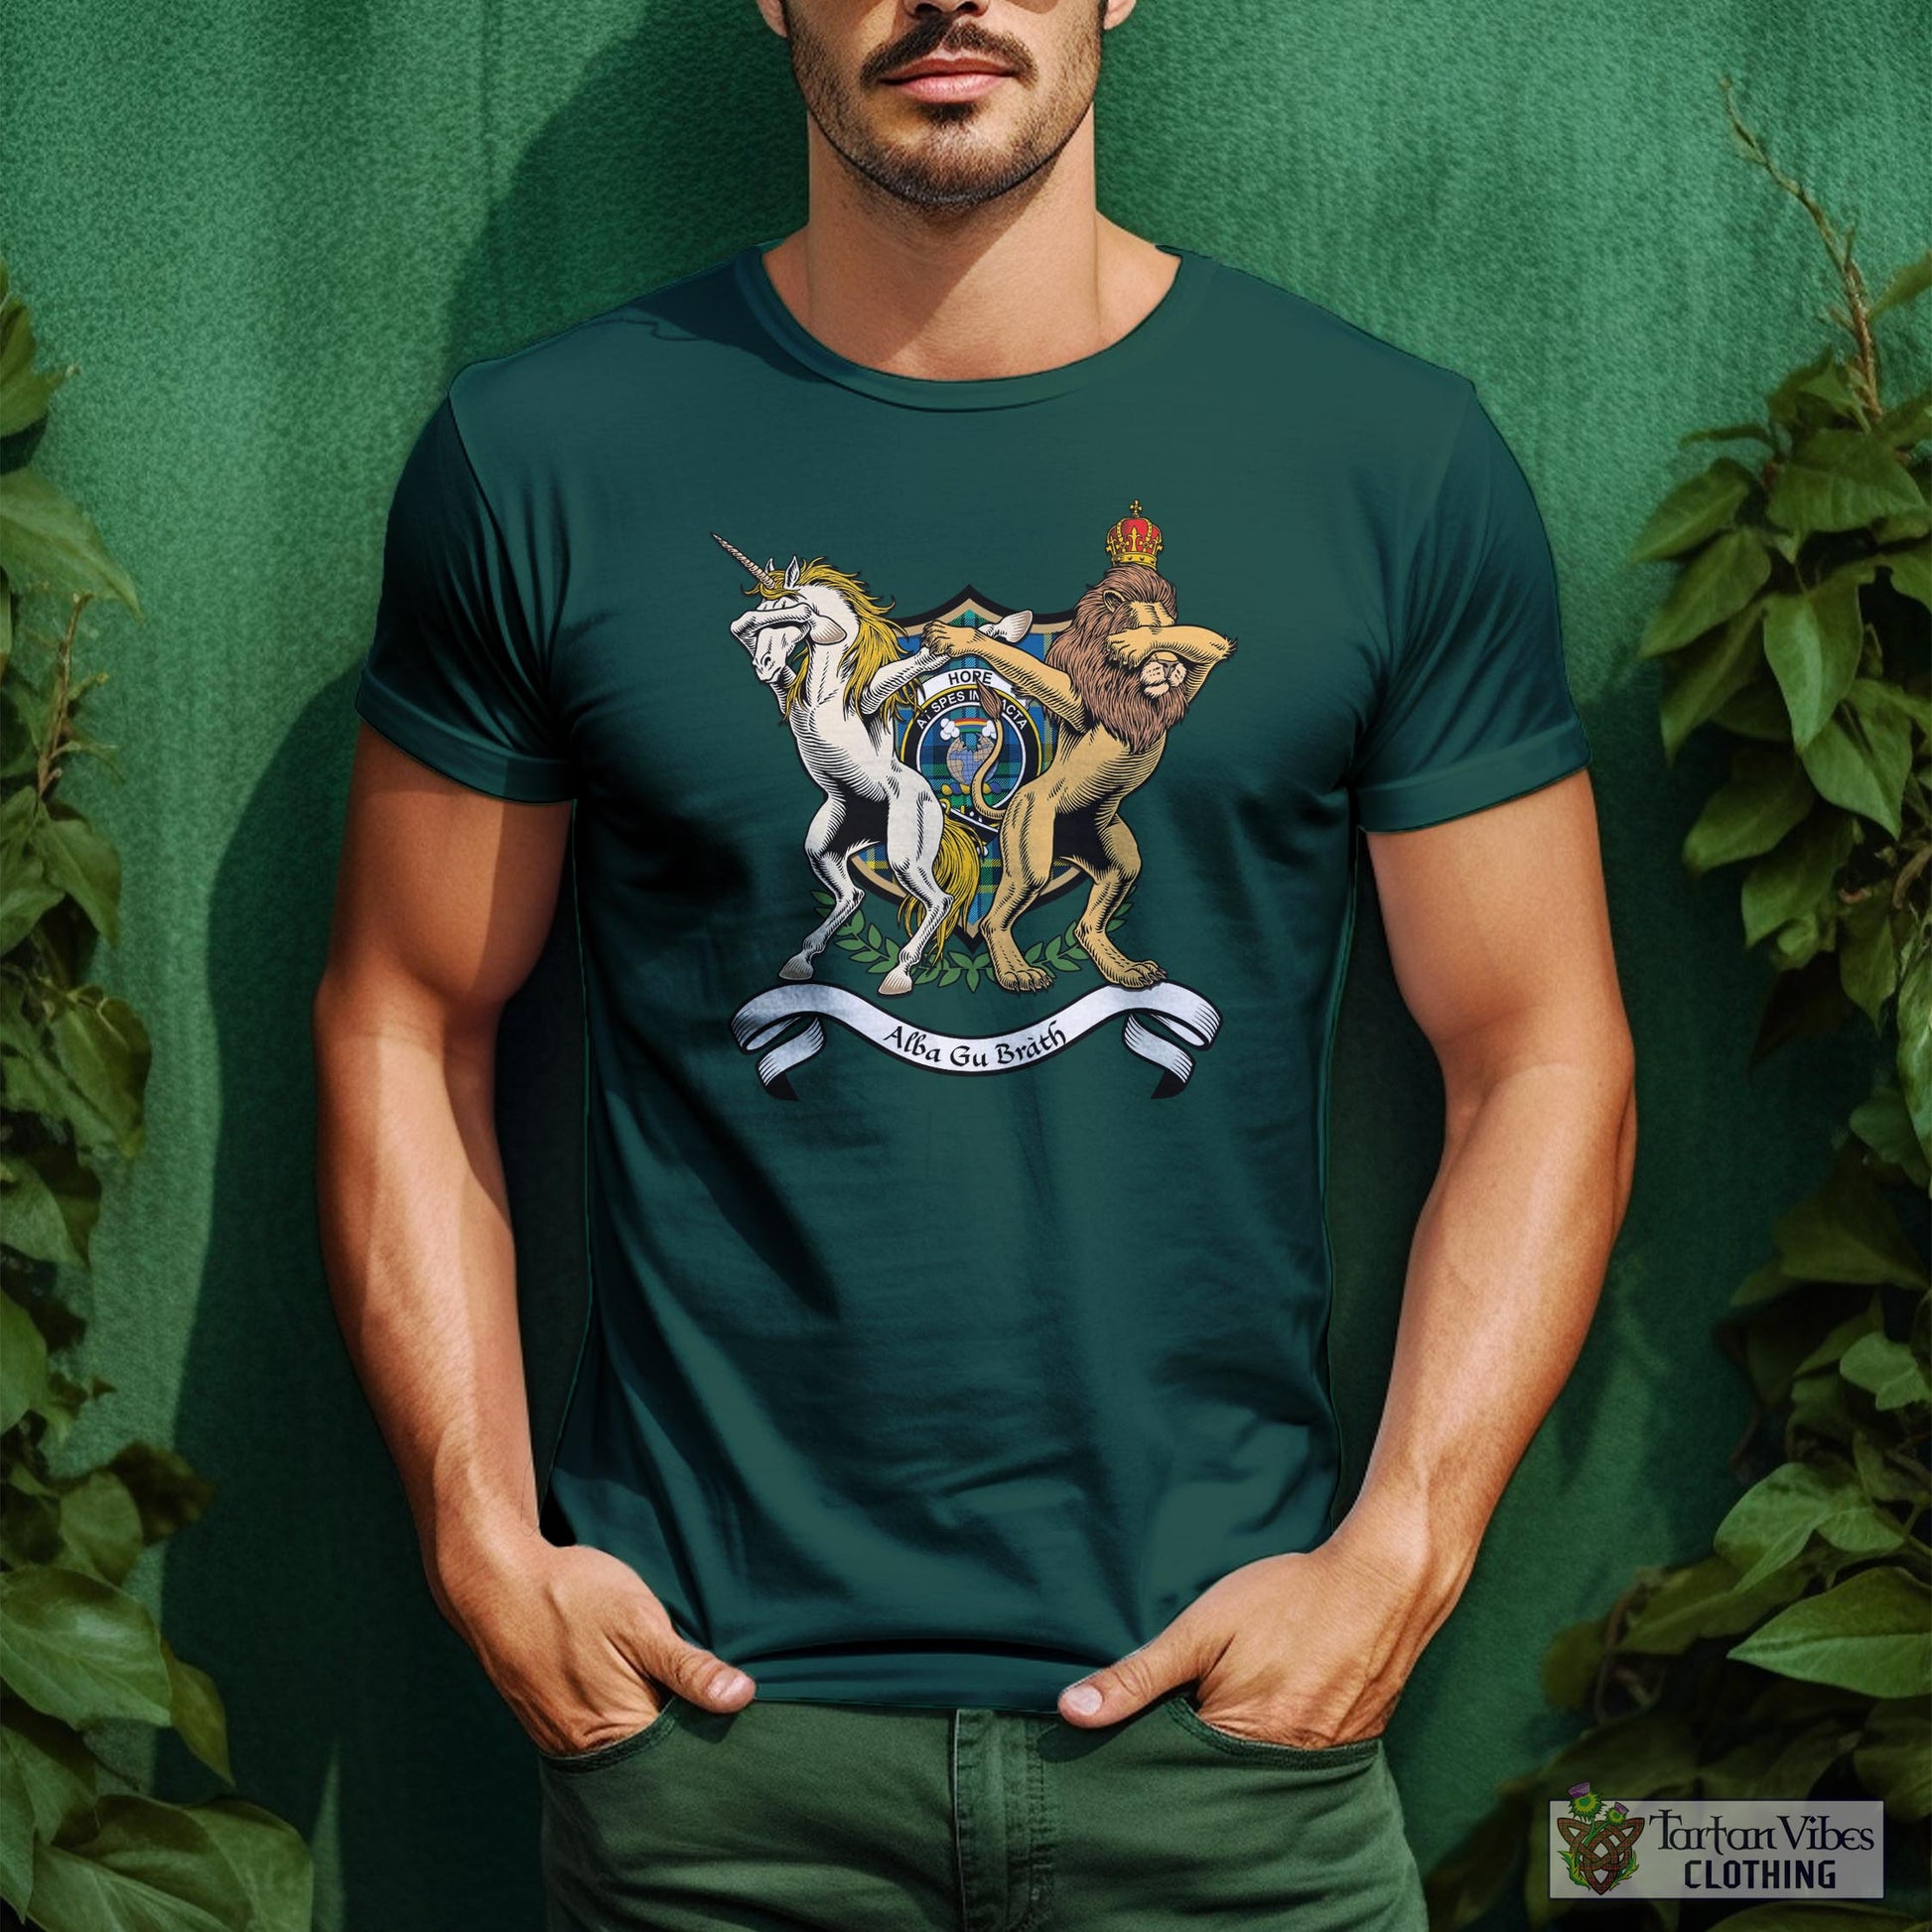 Tartan Vibes Clothing Hope Ancient Family Crest Cotton Men's T-Shirt with Scotland Royal Coat Of Arm Funny Style